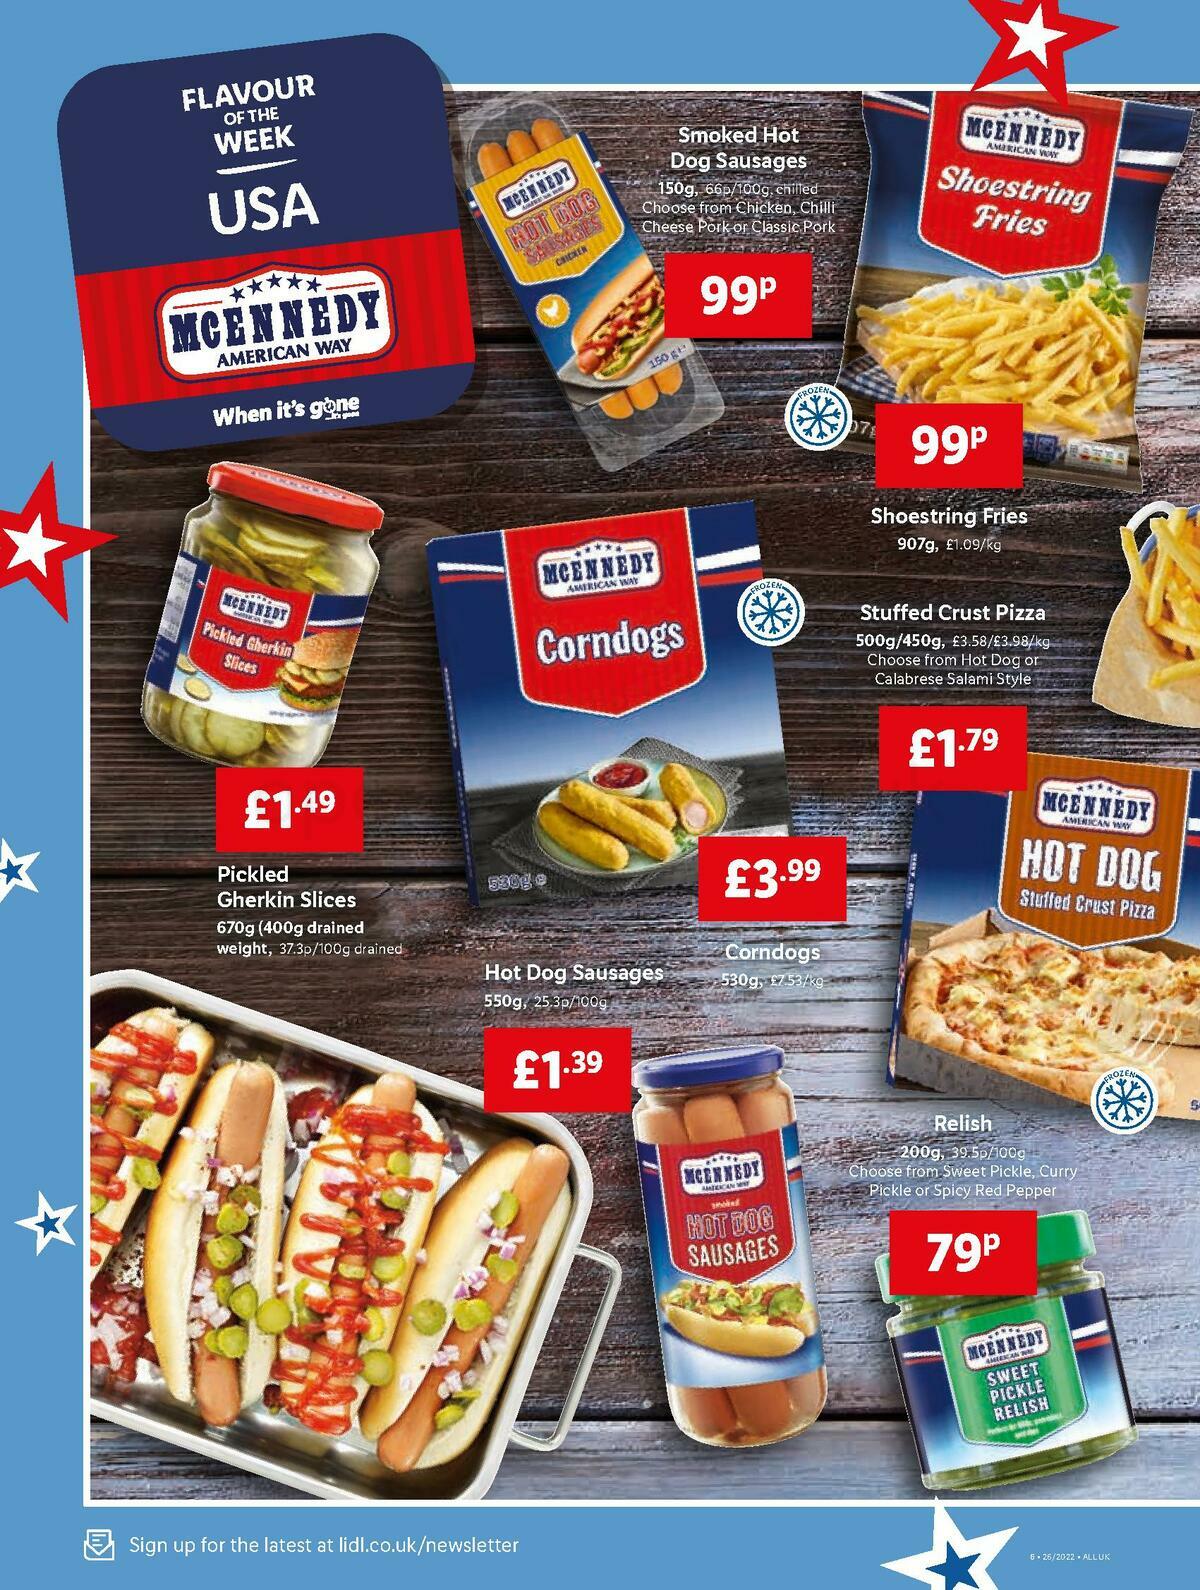 LIDL Offers from 30 June